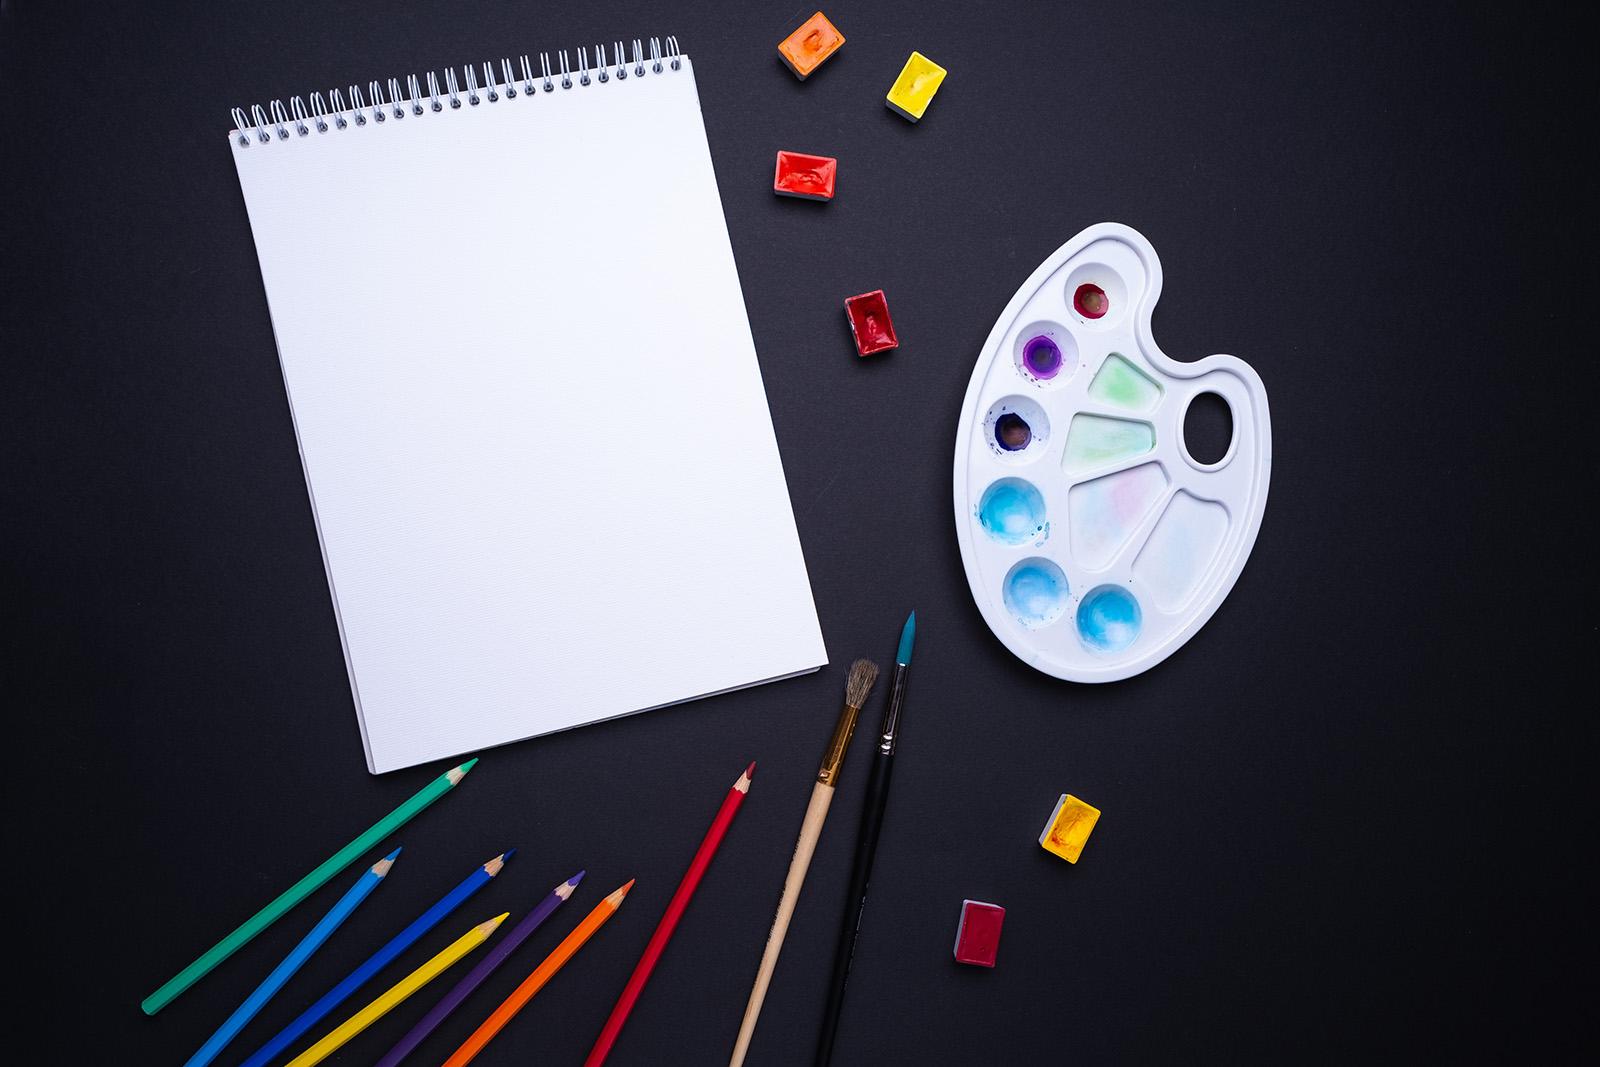 Sketch pad with color pencils and paint brushes - https://unsplash.com/@frostroomhead